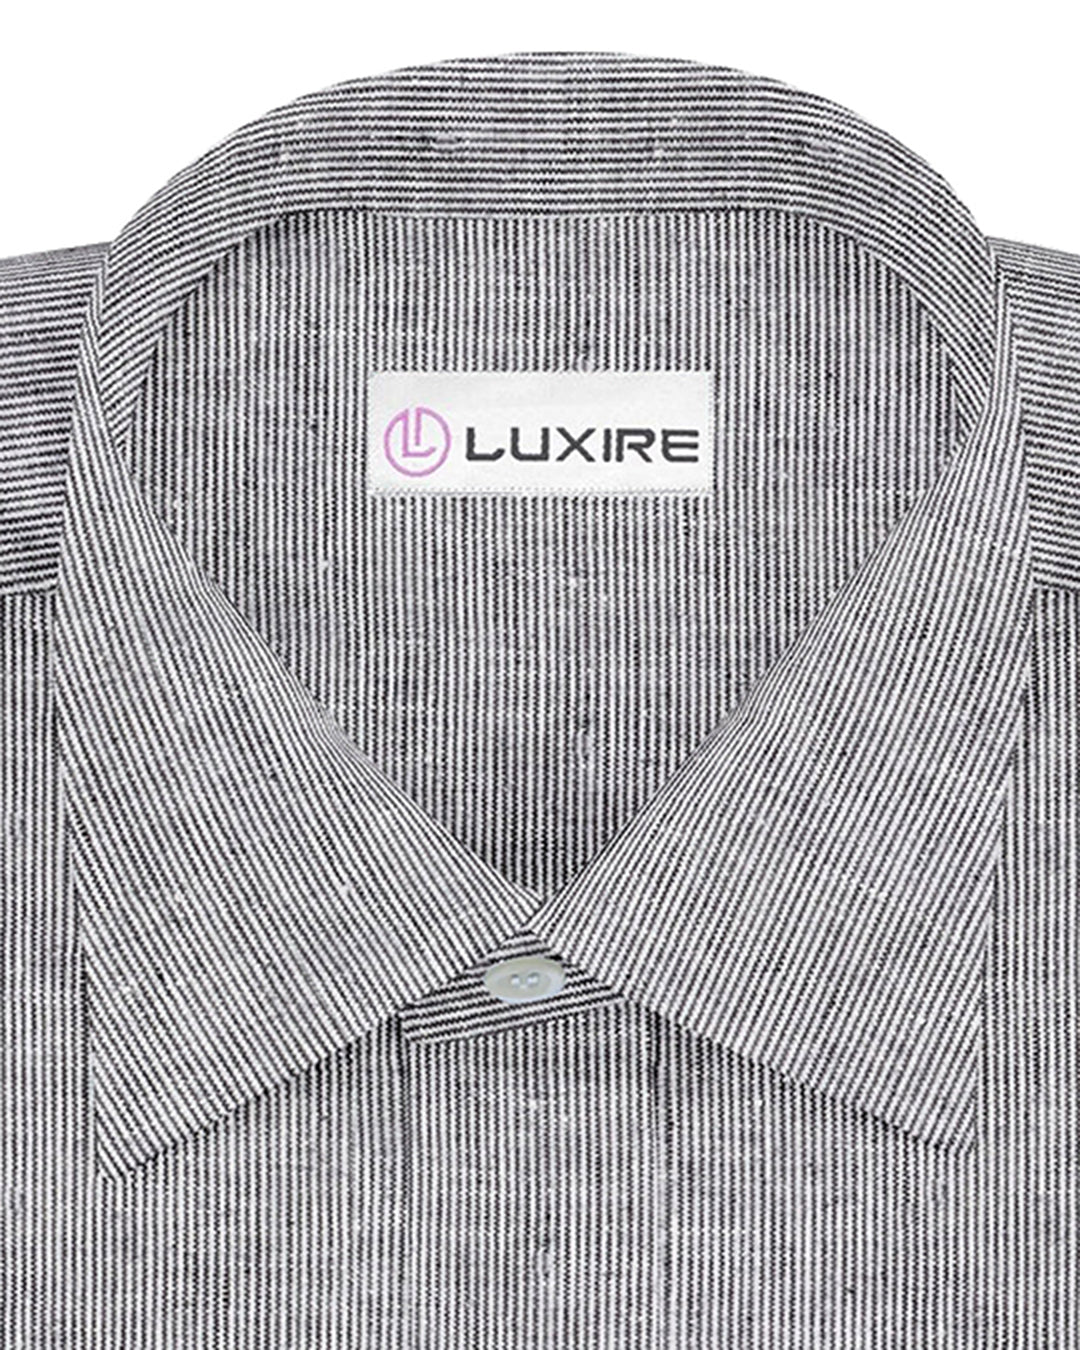 Collar of the custom linen shirt for men in black and white thin stripes by Luxire Clothing